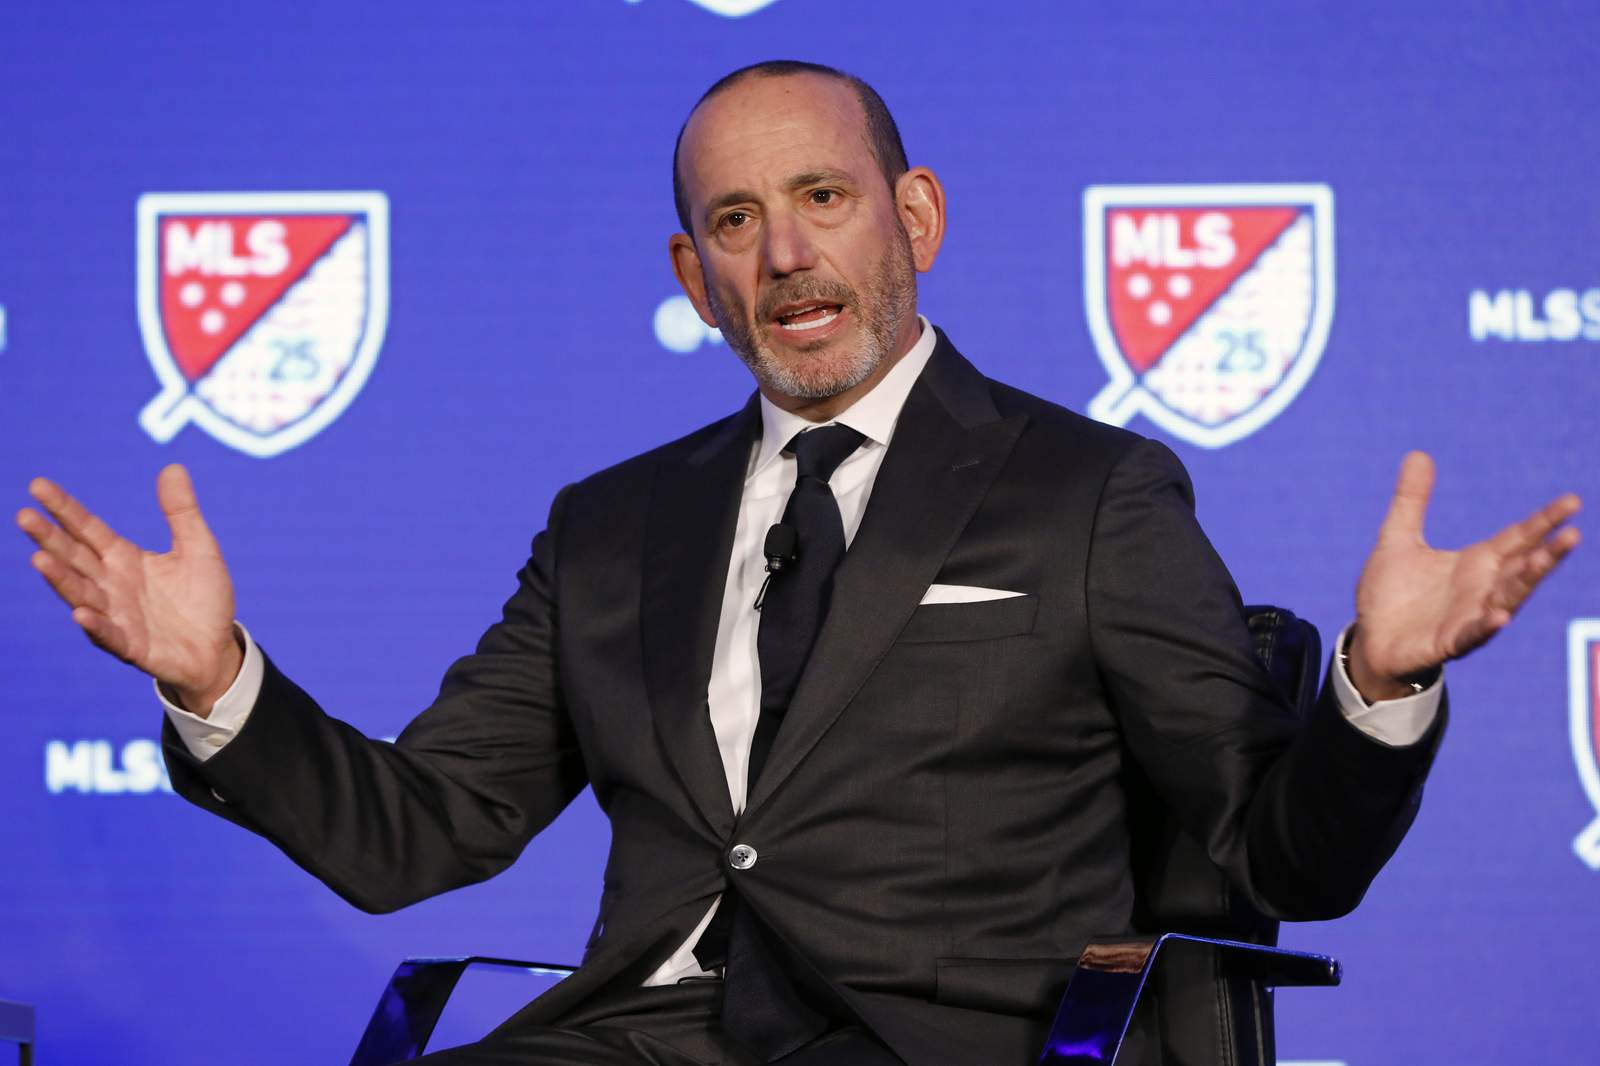 MLS to restart its season with tournament starting July 8